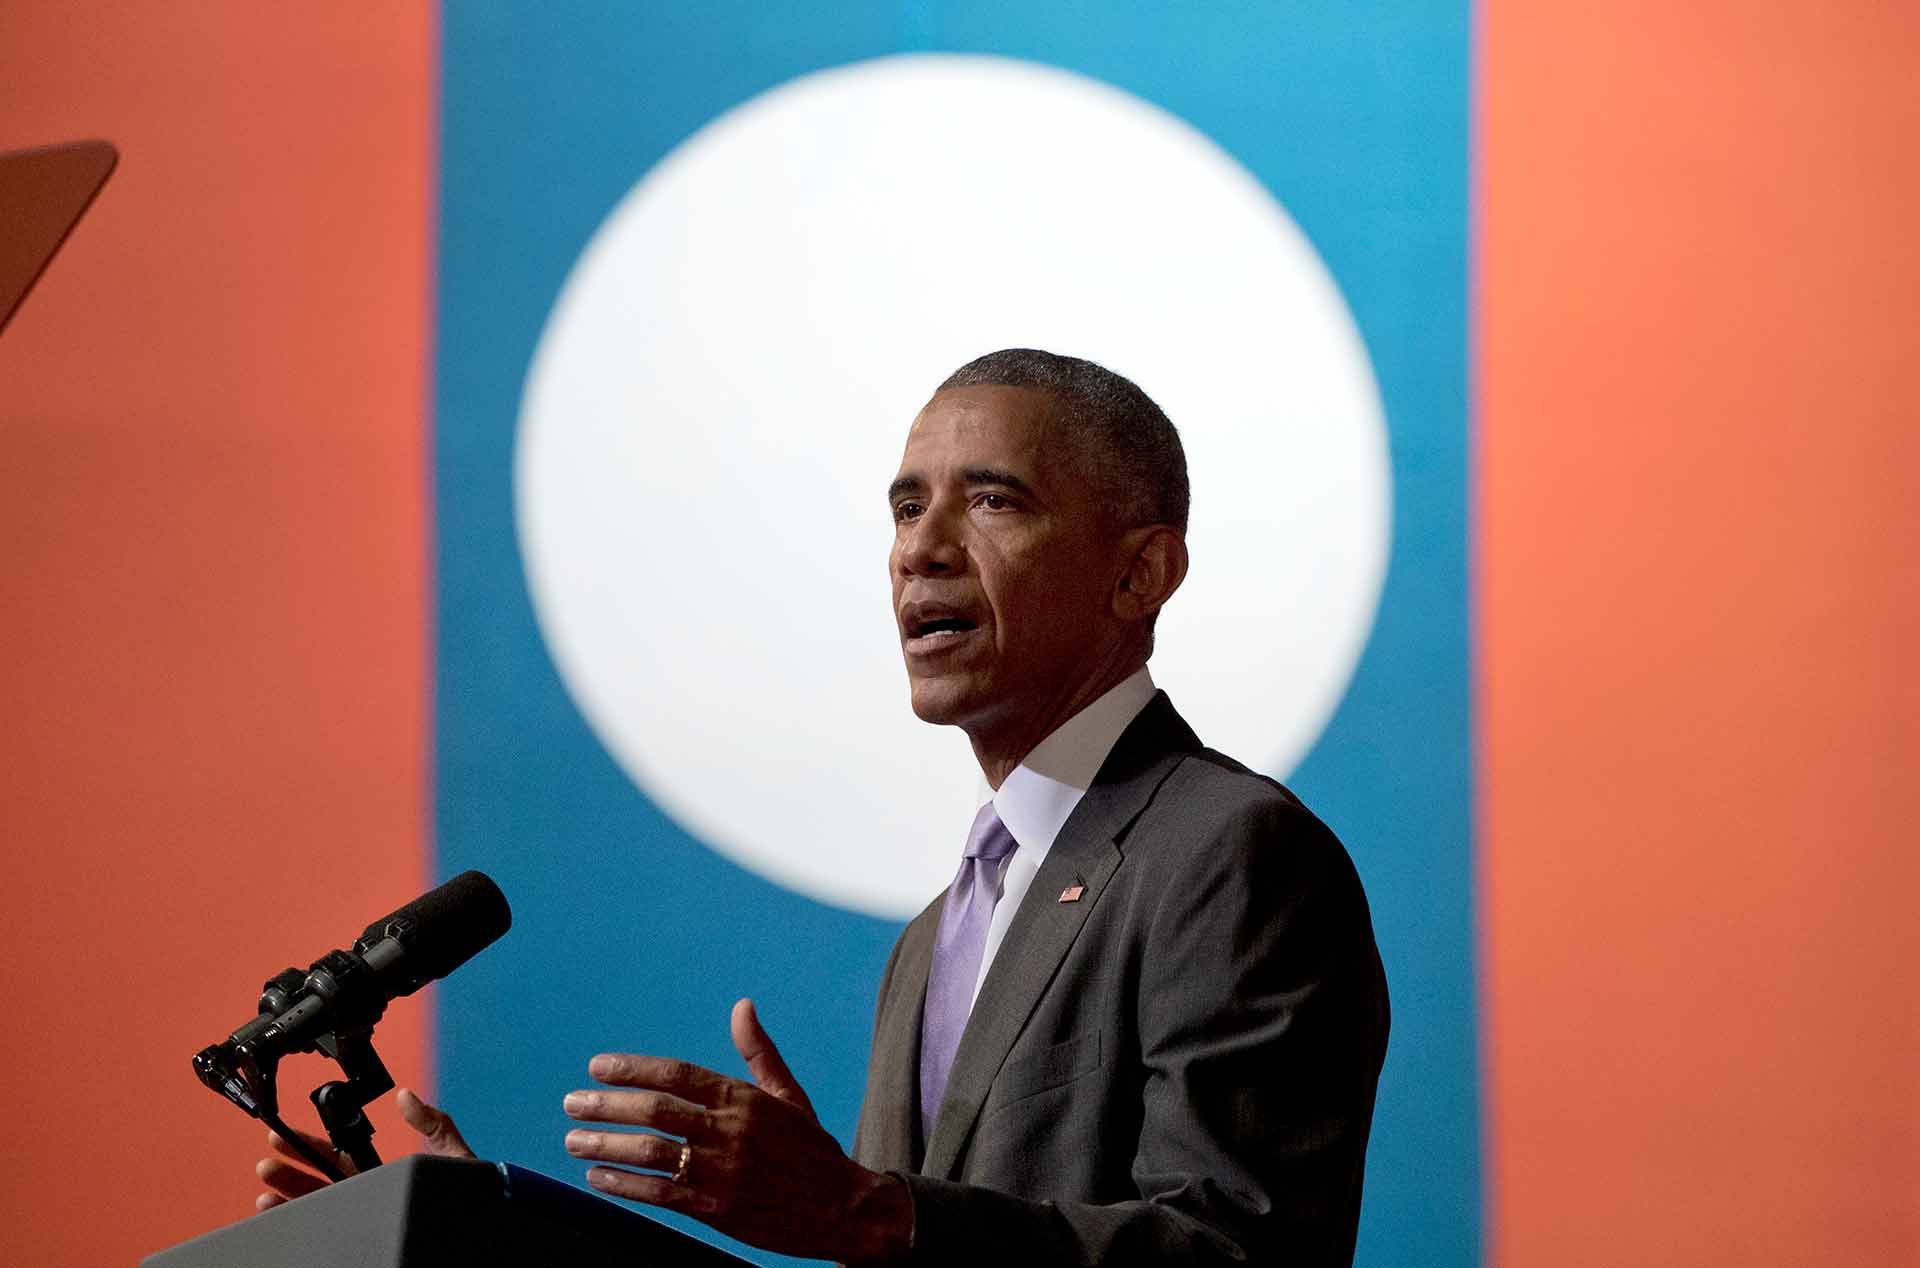 On historic trip to Laos, Obama aims to heal war wounds